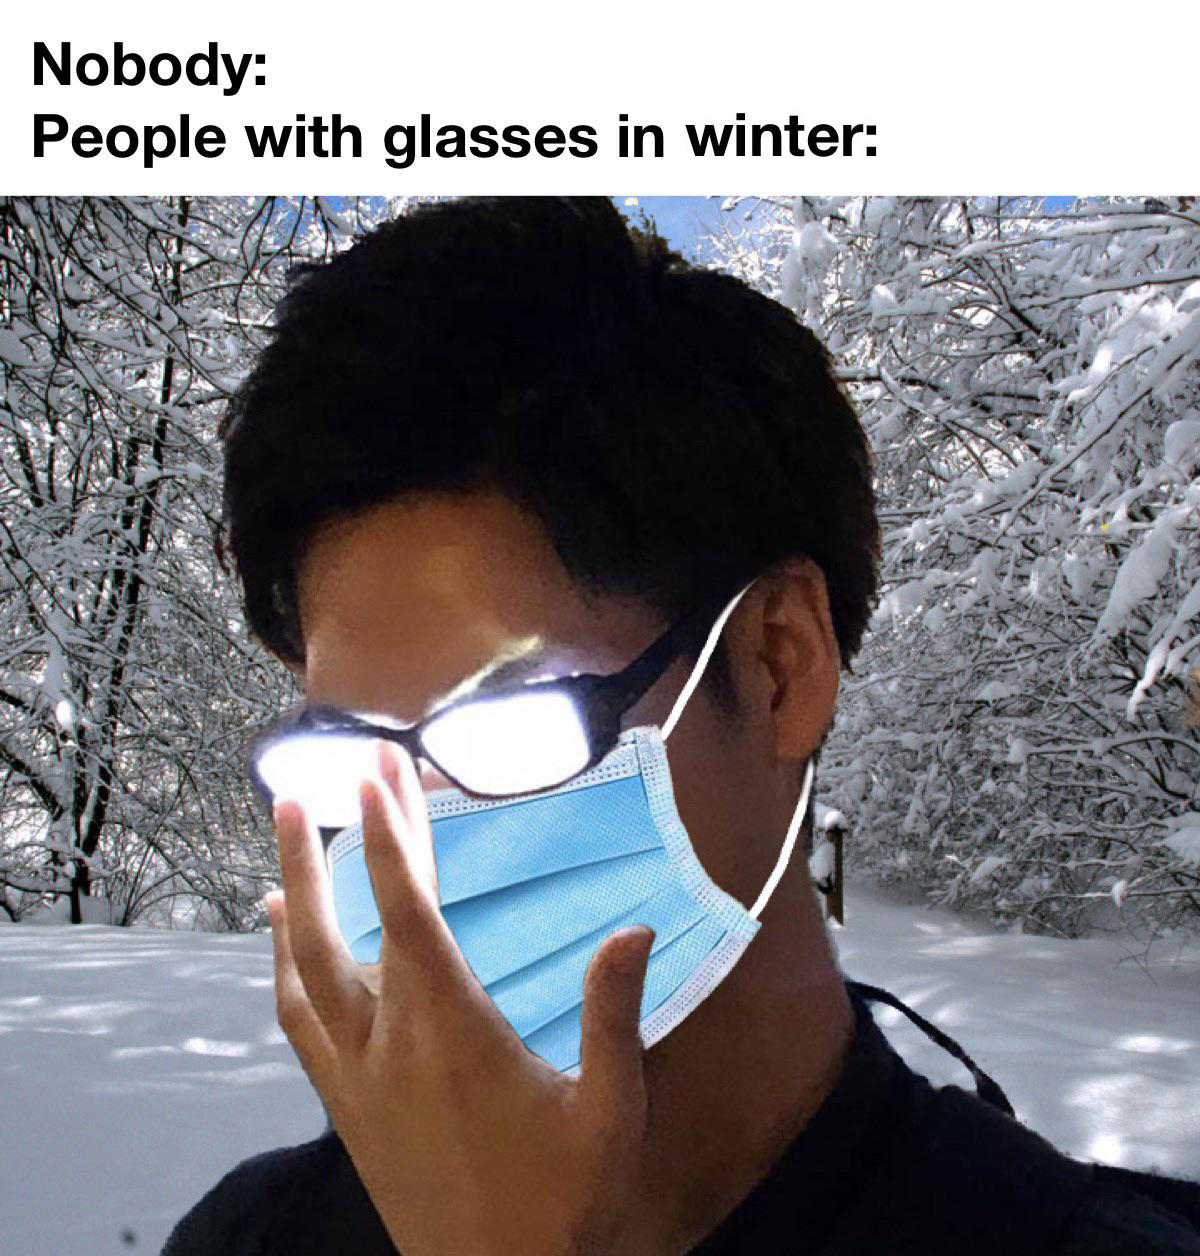 goggles - Nobody People with glasses in winter